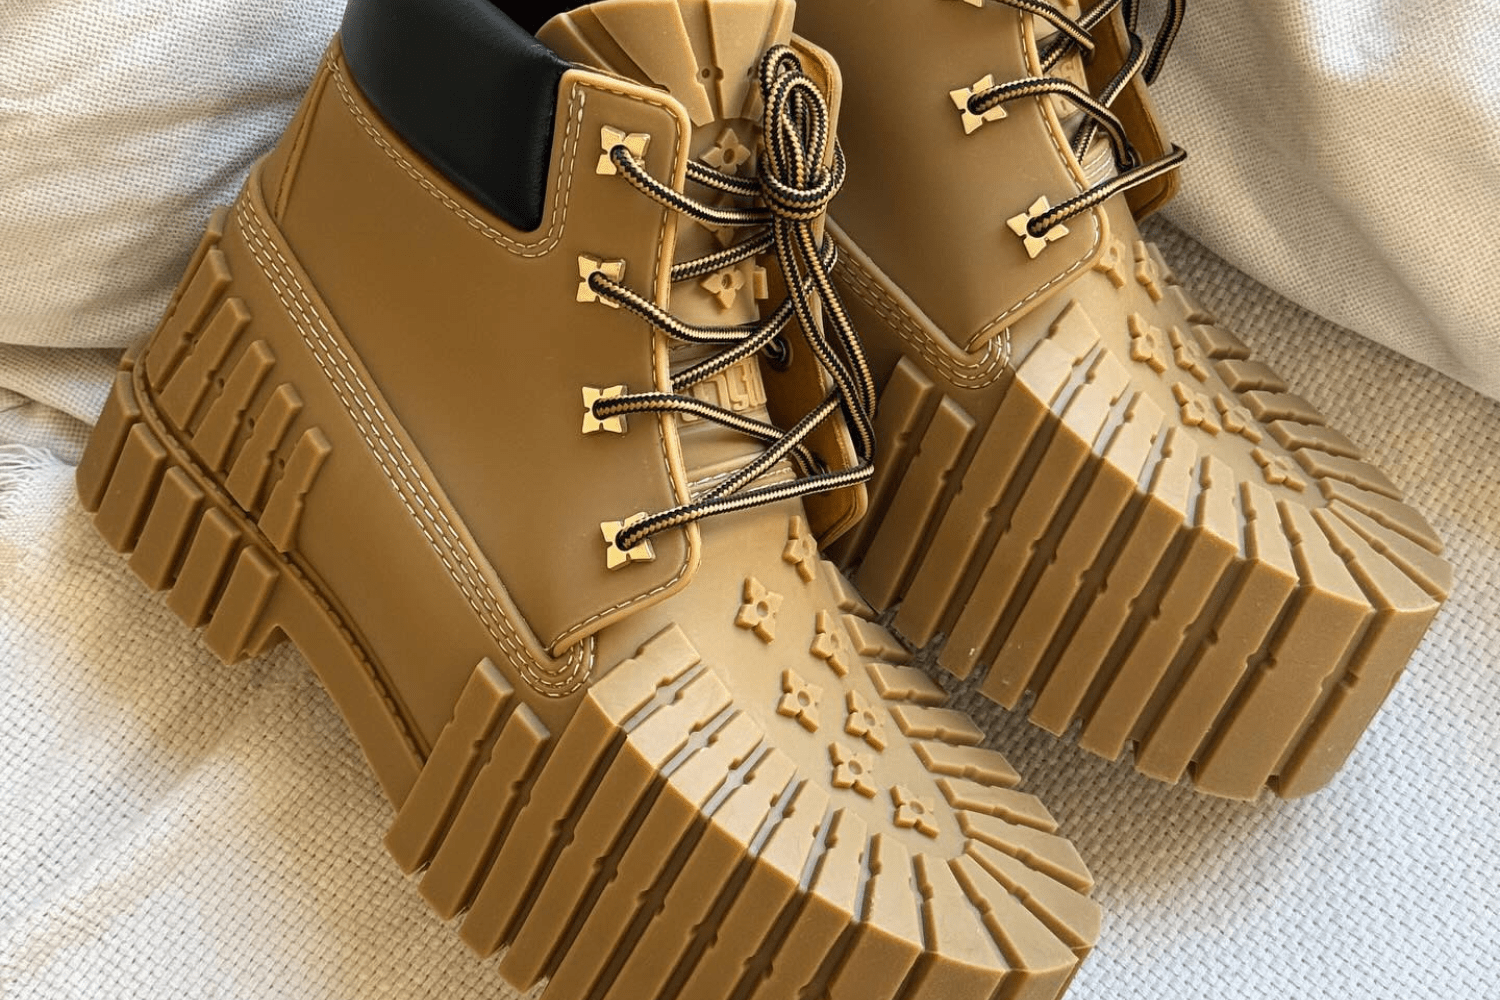 MSCHF arrives with the Timberland-inspired 2x4 Boot